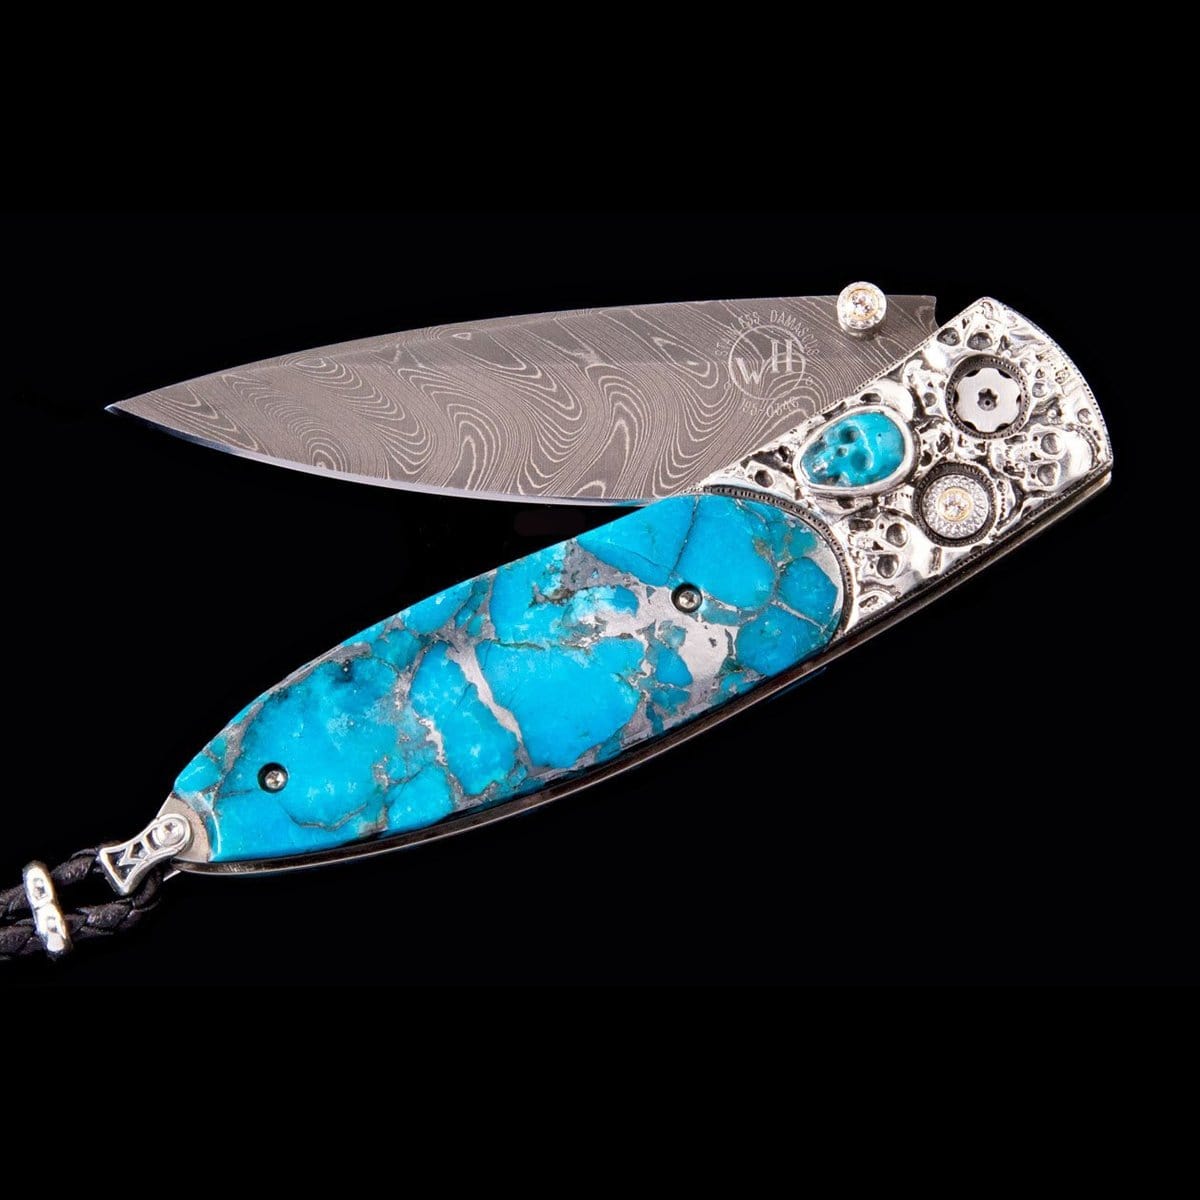 Monarch Tombstone Limited Edition Knife - B05 TOMBSTONE